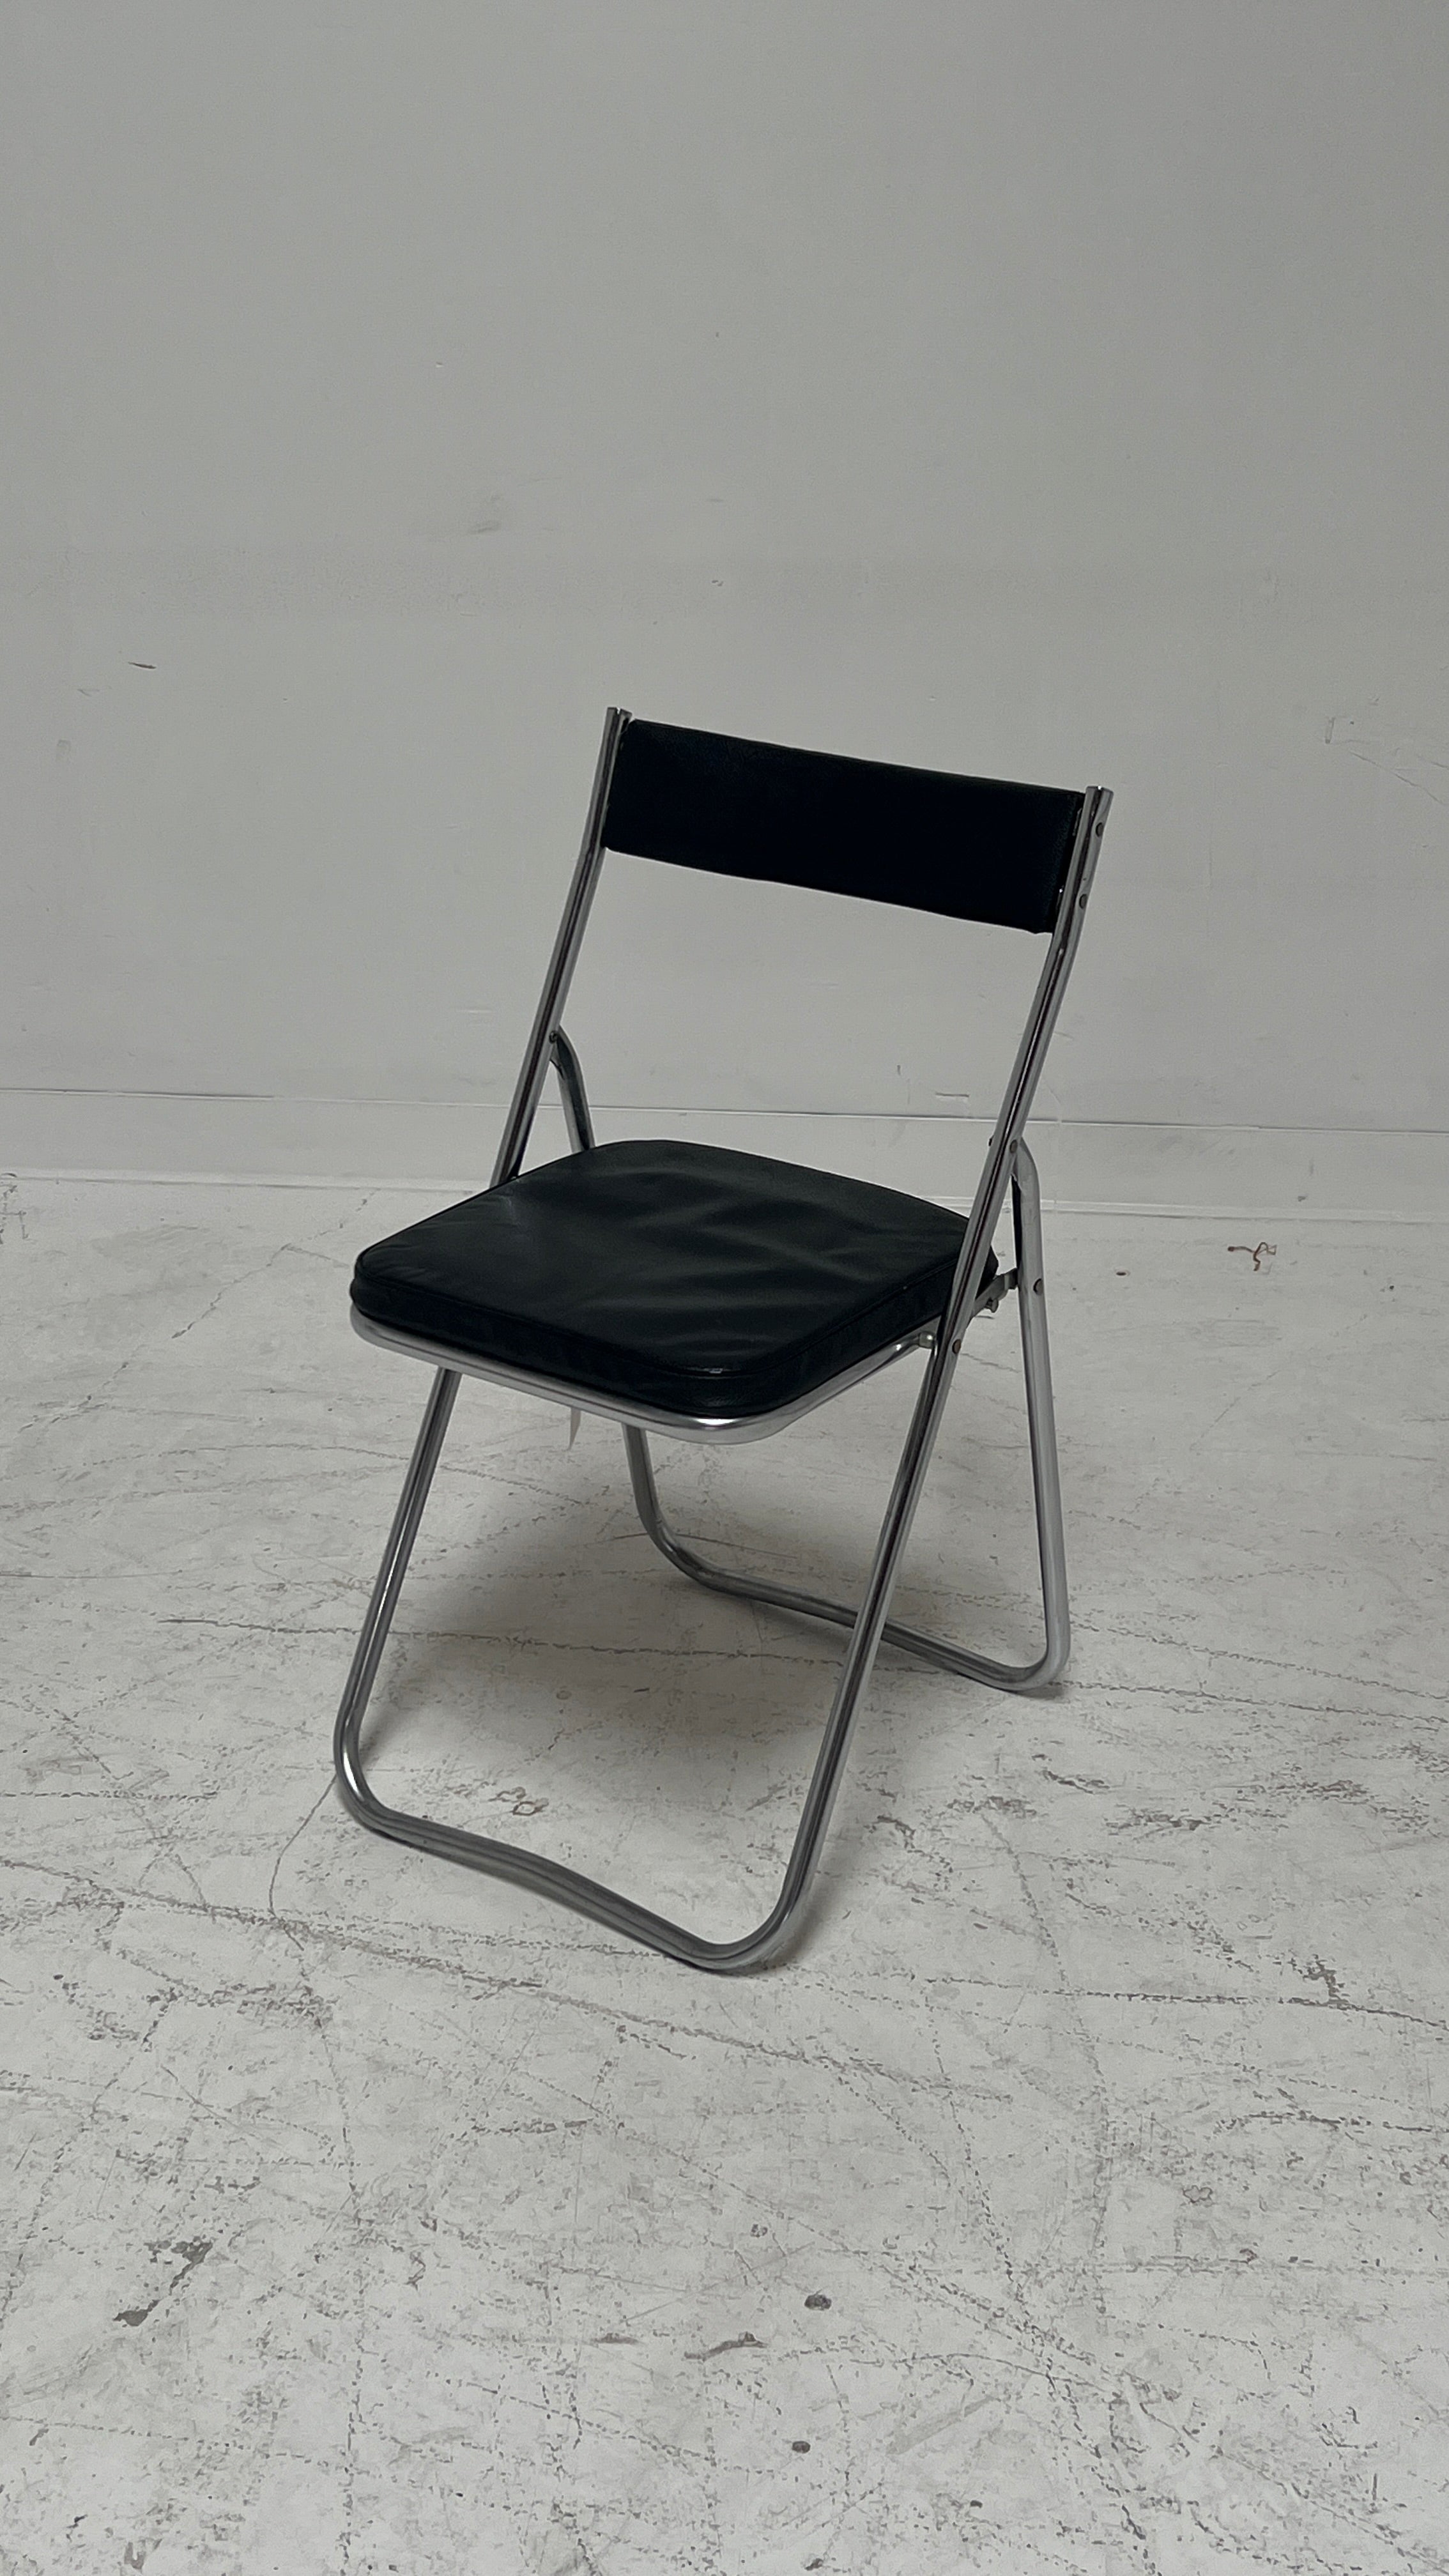 Mid Century Black Leather and Chrome Folding Chair, Made in Japan (2 AVAILABLE)